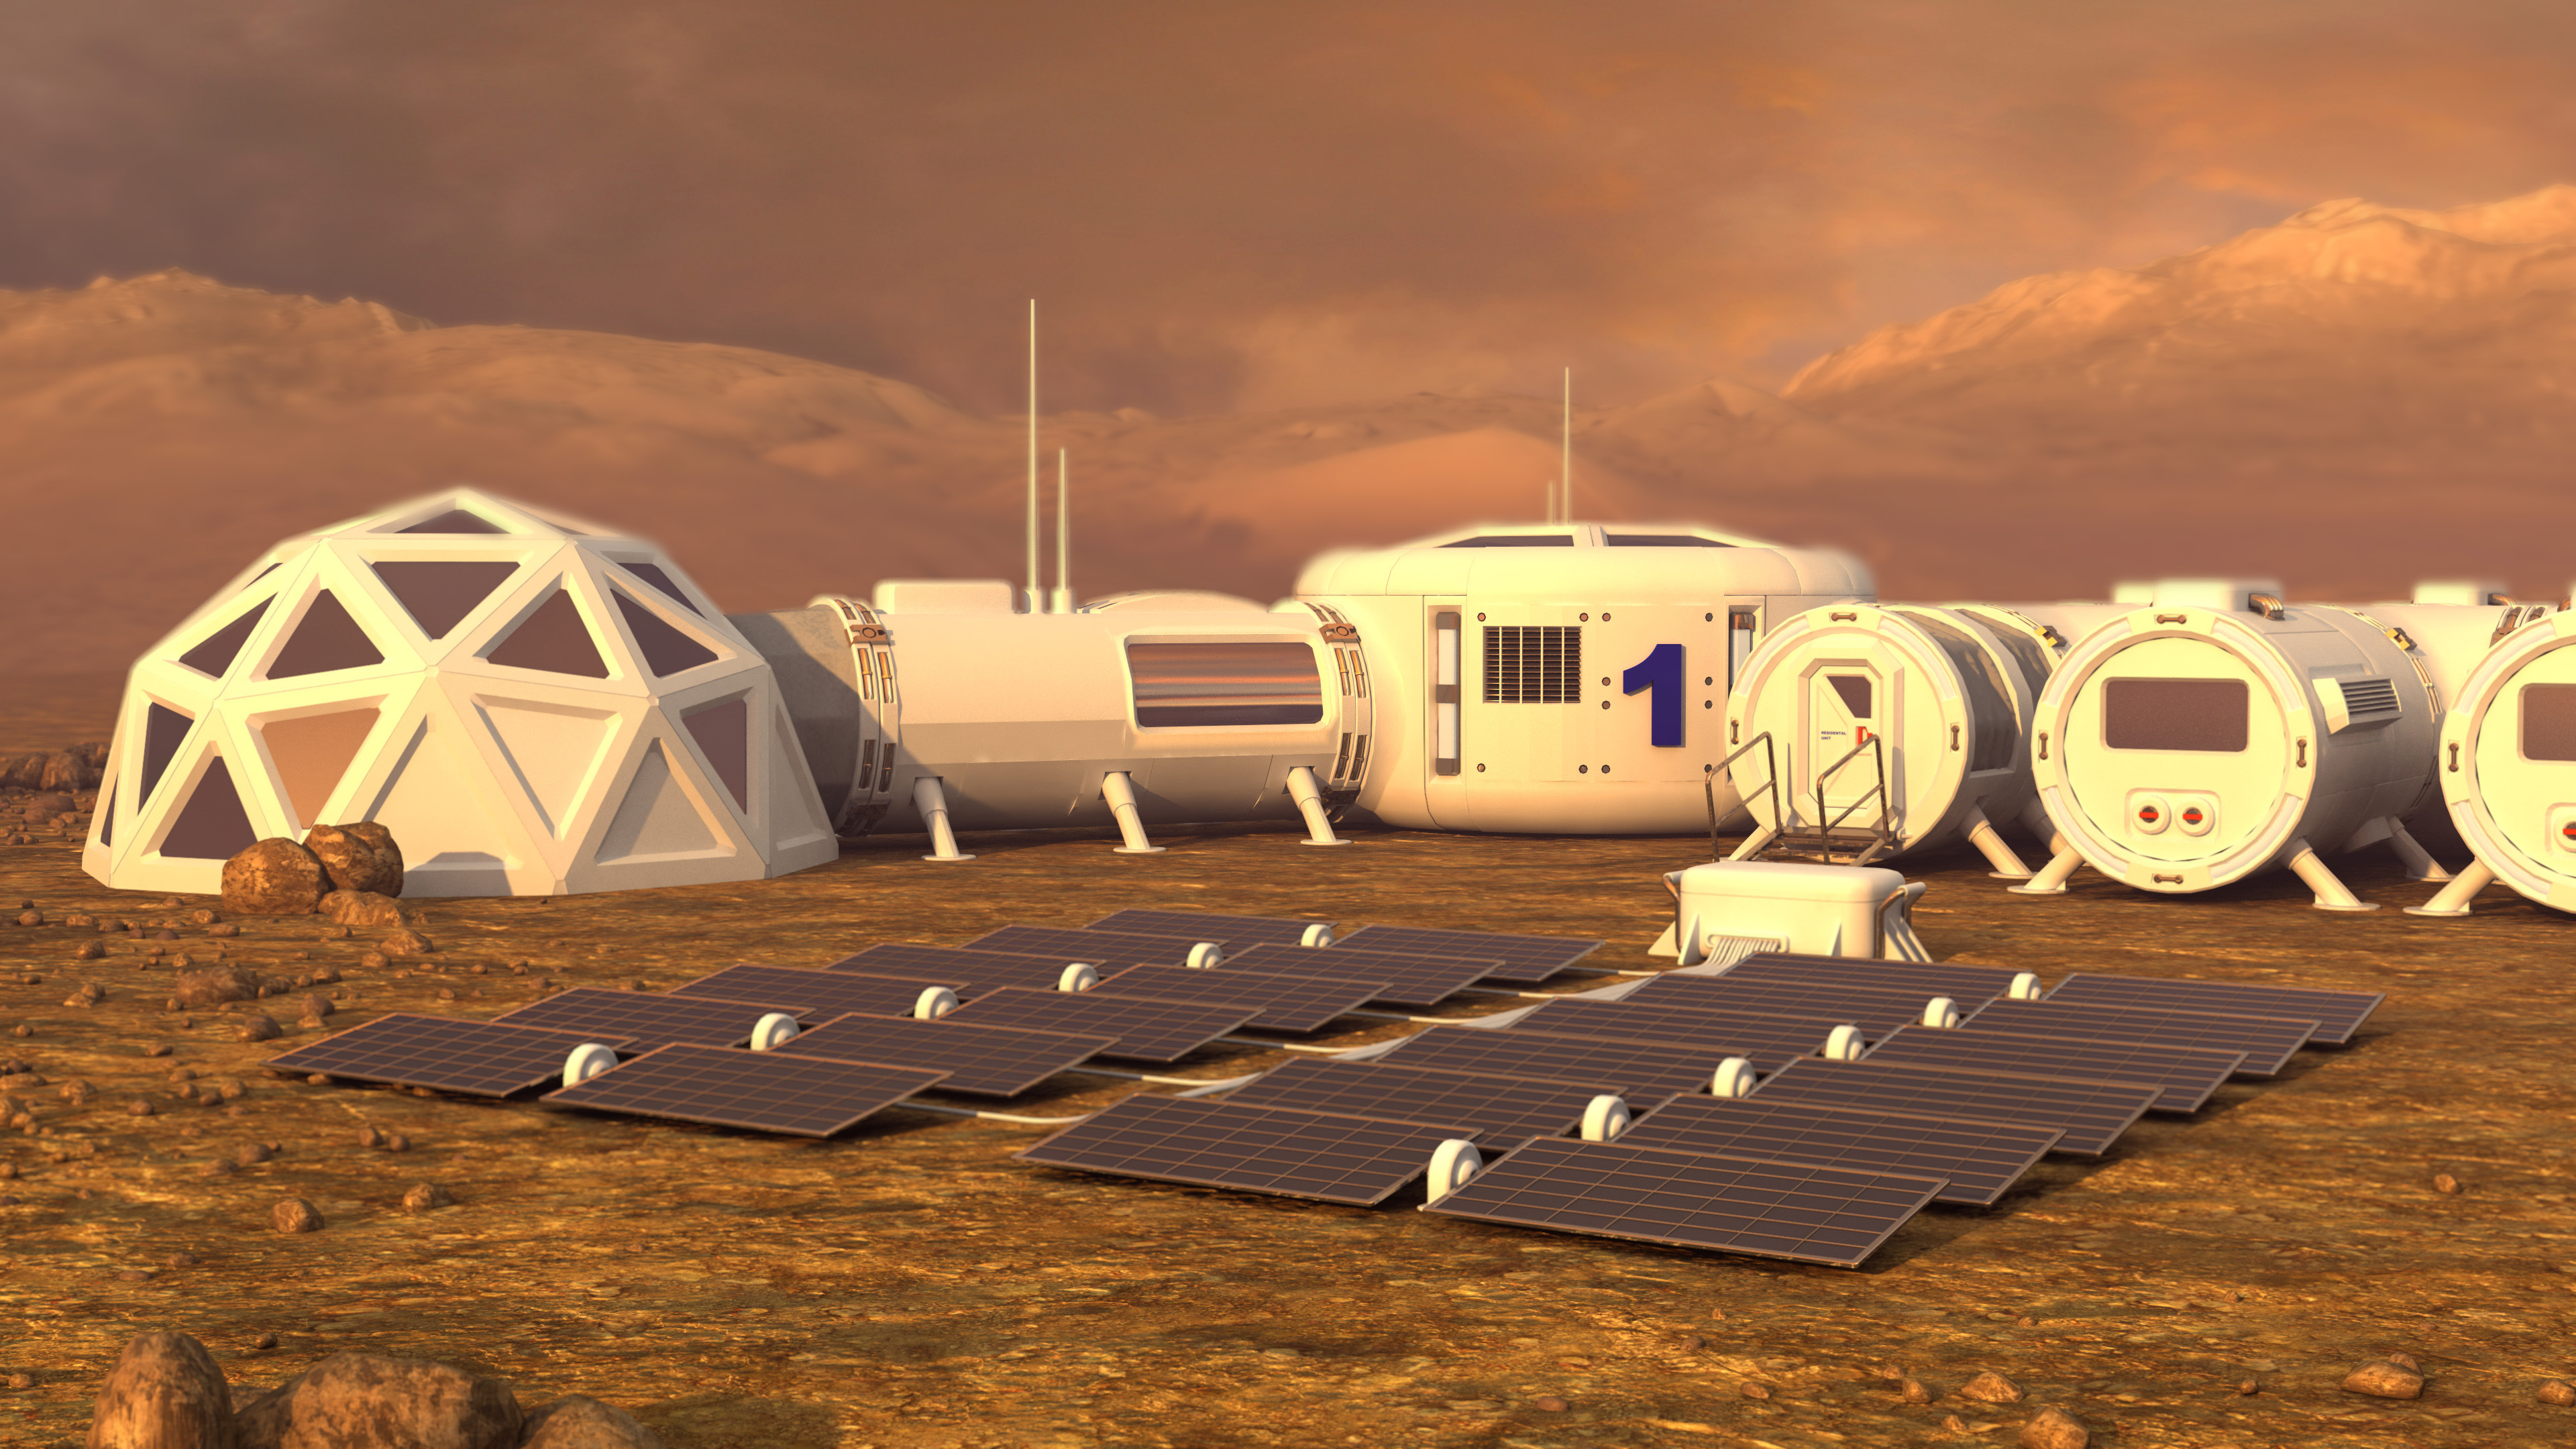 Beyond earth, shelter from the elements image